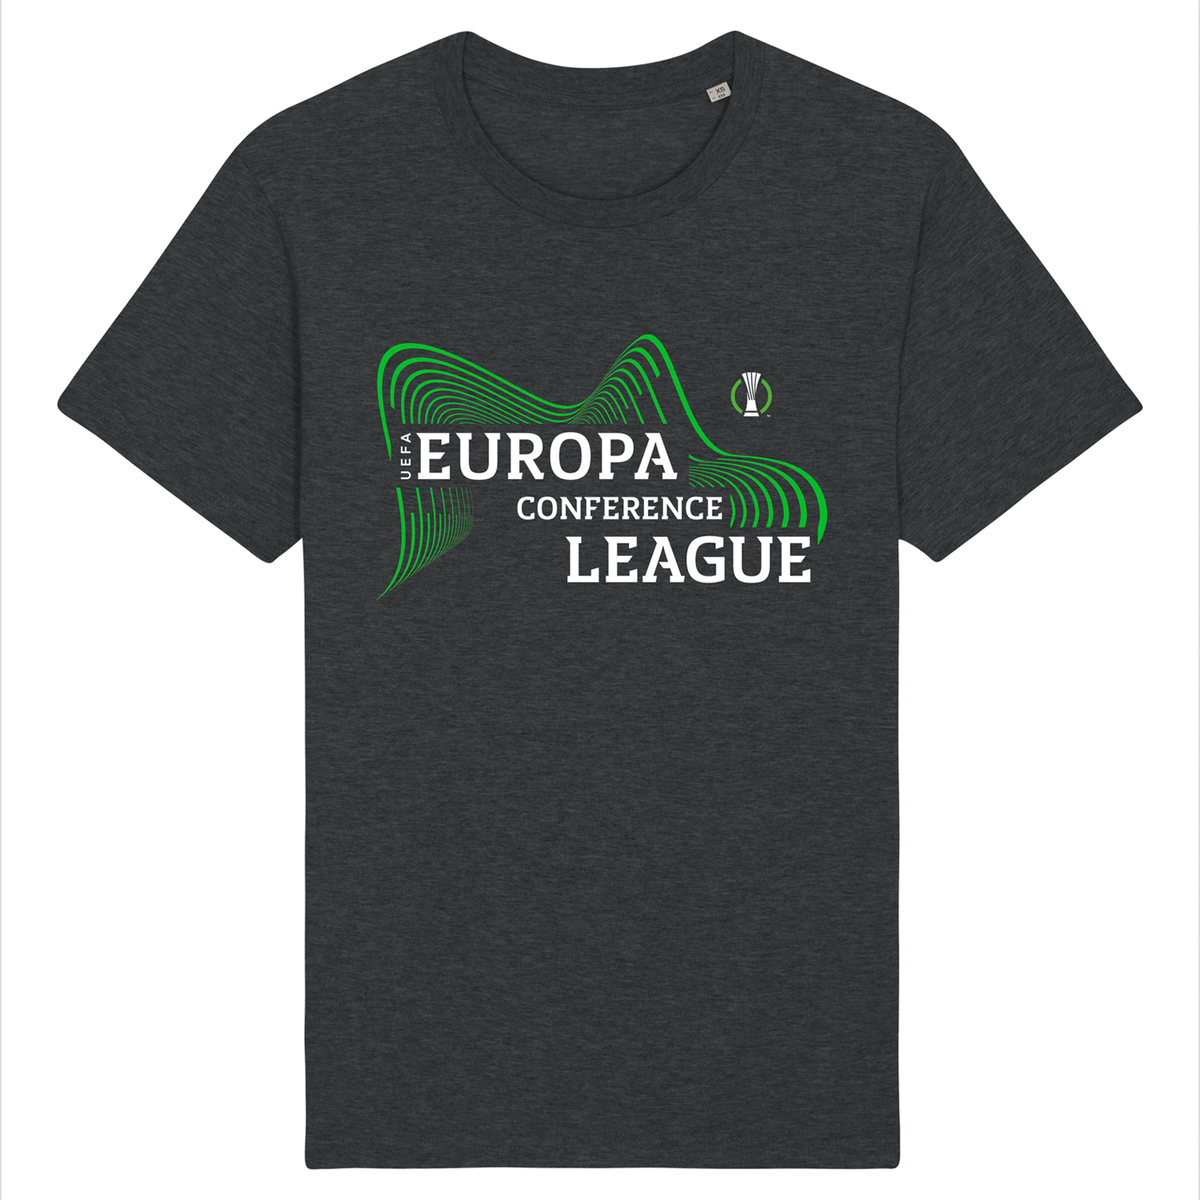 UEFA Europa Conference League -  Energy Wave Dark Grey T-Shirt UEFA Club Competitions Online Store